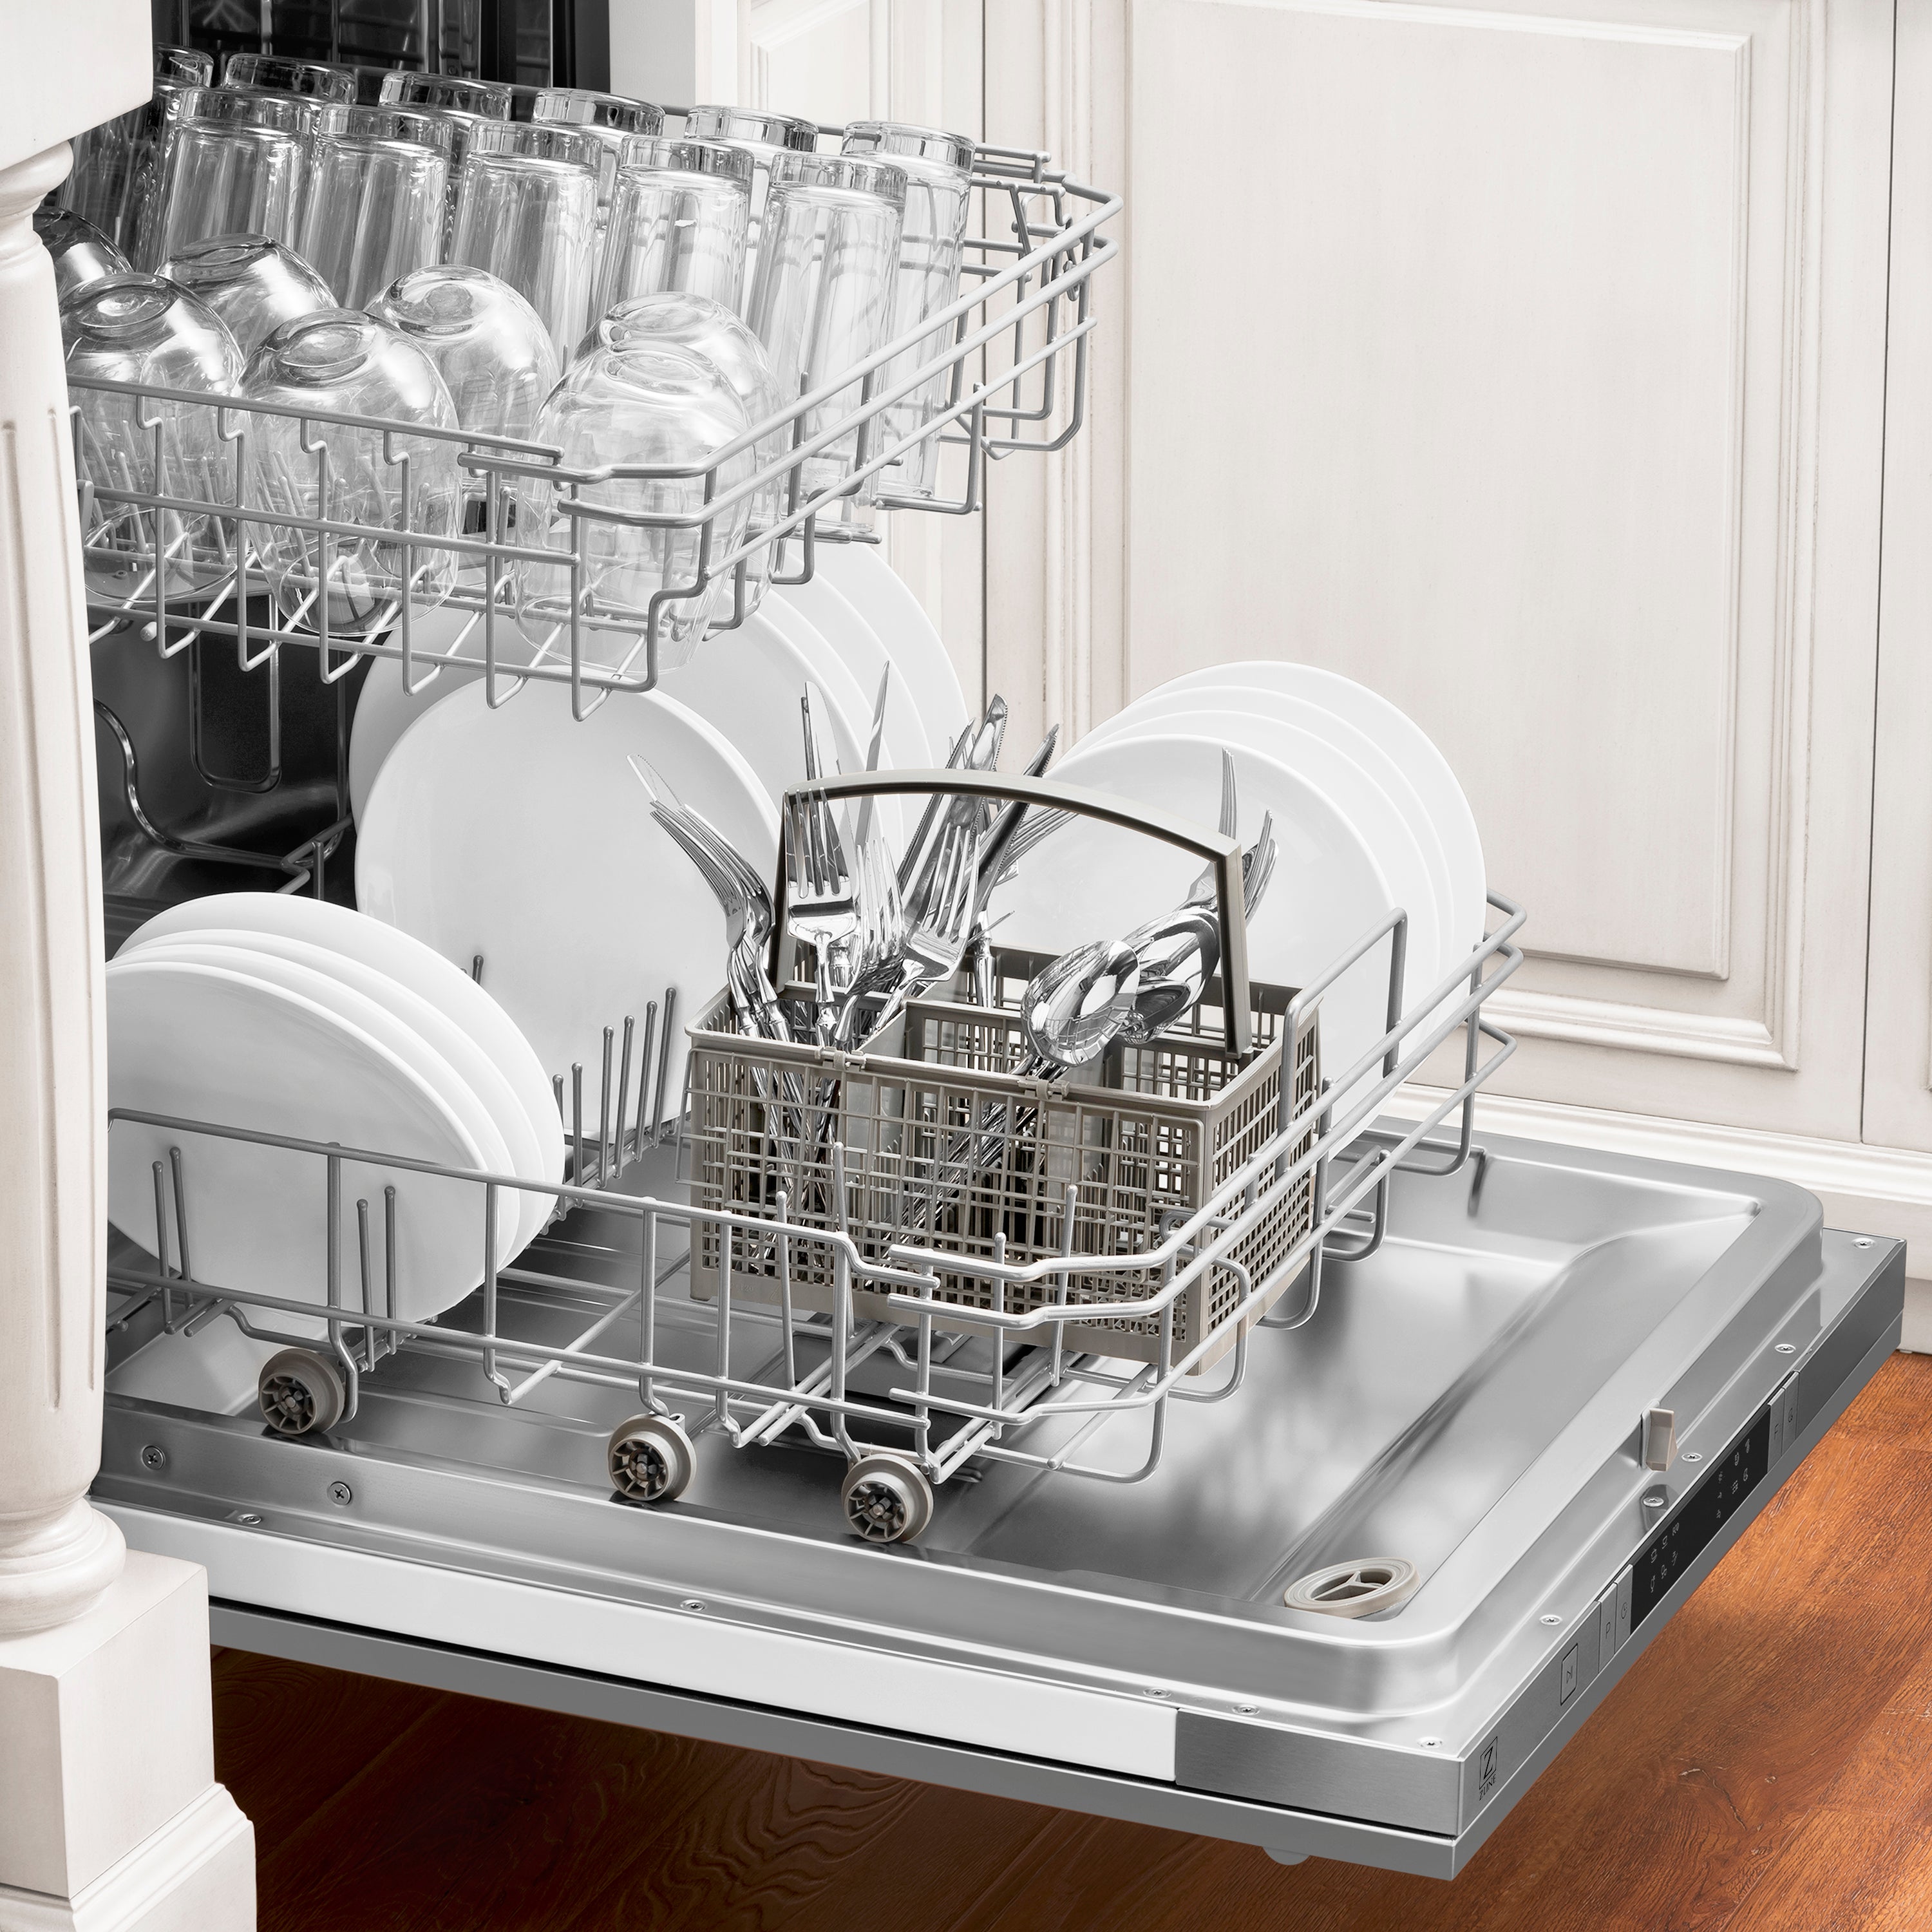 ZLINE 24 in. Stainless Steel Top Control Dishwasher with Stainless Steel Tub and Traditional Style Handle, 52dBa (DW-304-H-24)